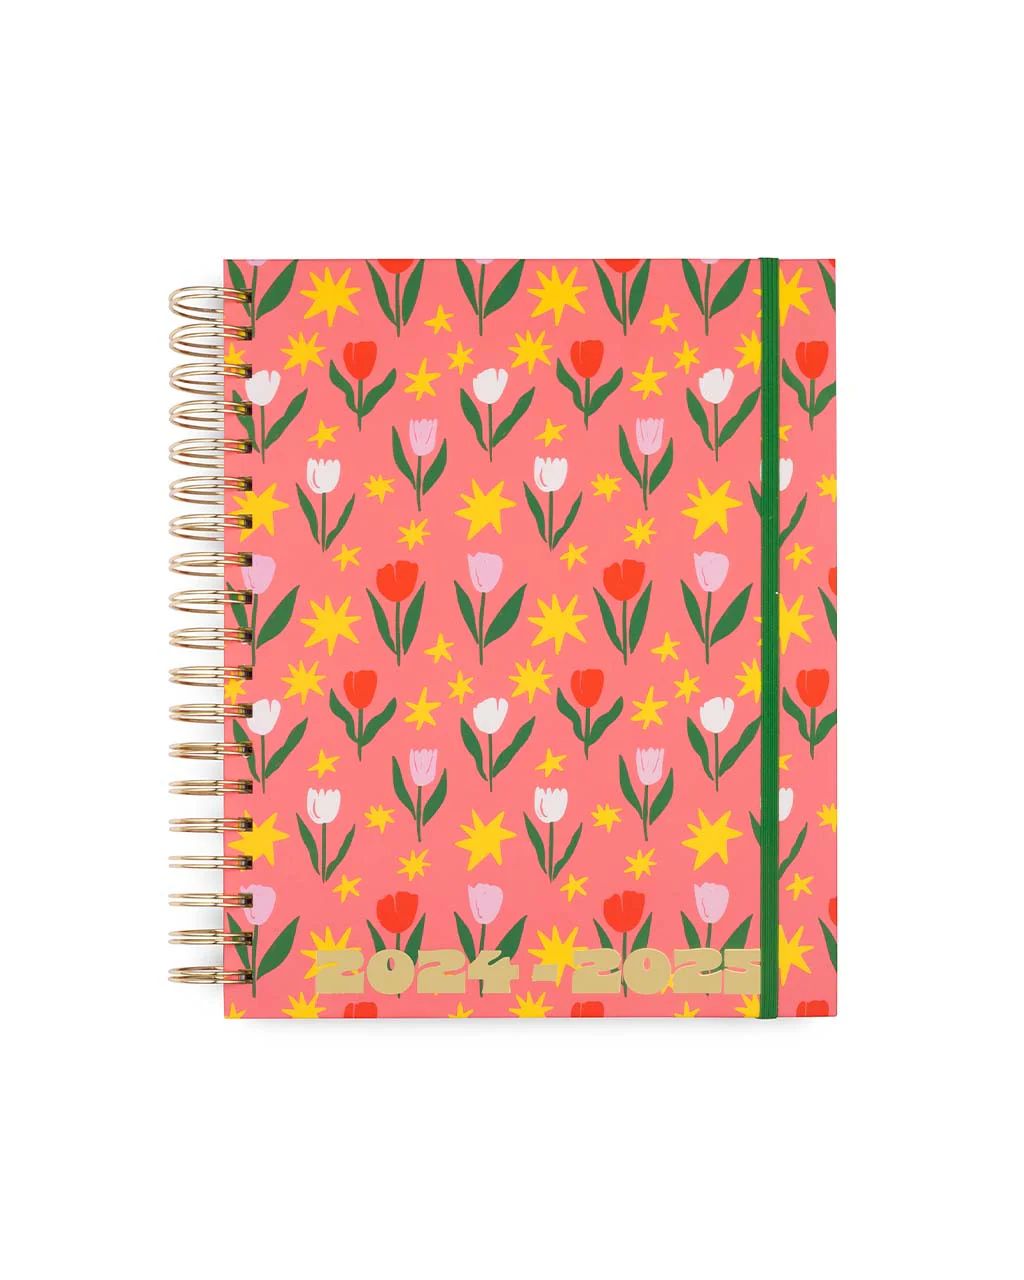 Large 17-Month Academic Planner - Tulips on Pink | ban.do